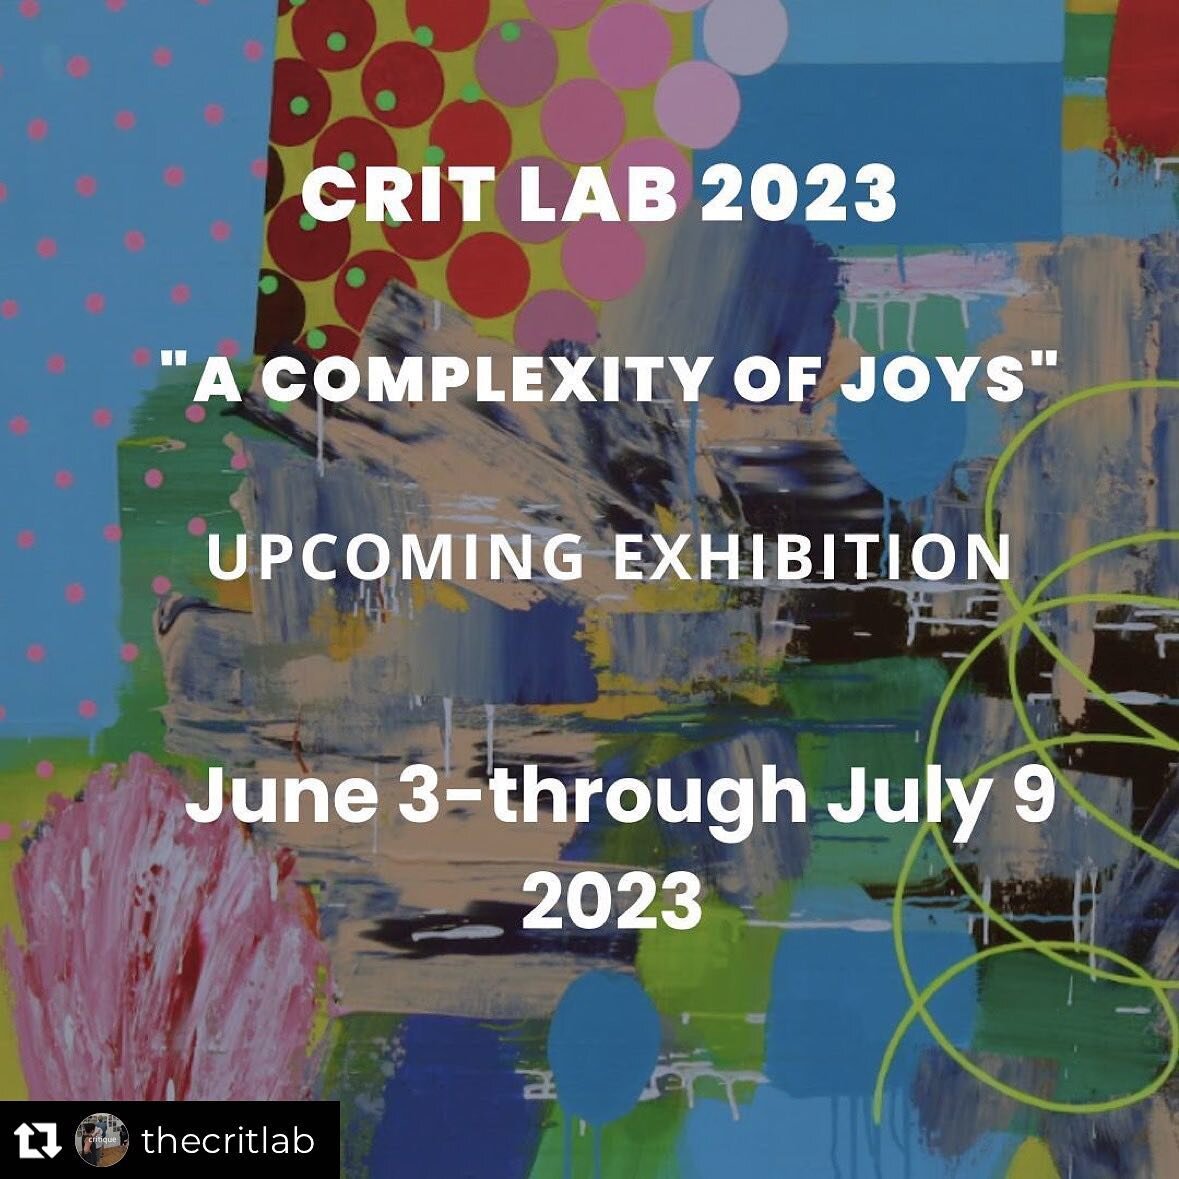 I&rsquo;m delighted to have work included in this upcoming exhibit, curated by Patricia Miranda and Francine Weiss. 

#art #thecritlab #portchester #nyc #portchesterartsfestival #acomplexityofjoys #exhibition #joy #artexhibition #patriciasuzannemiran